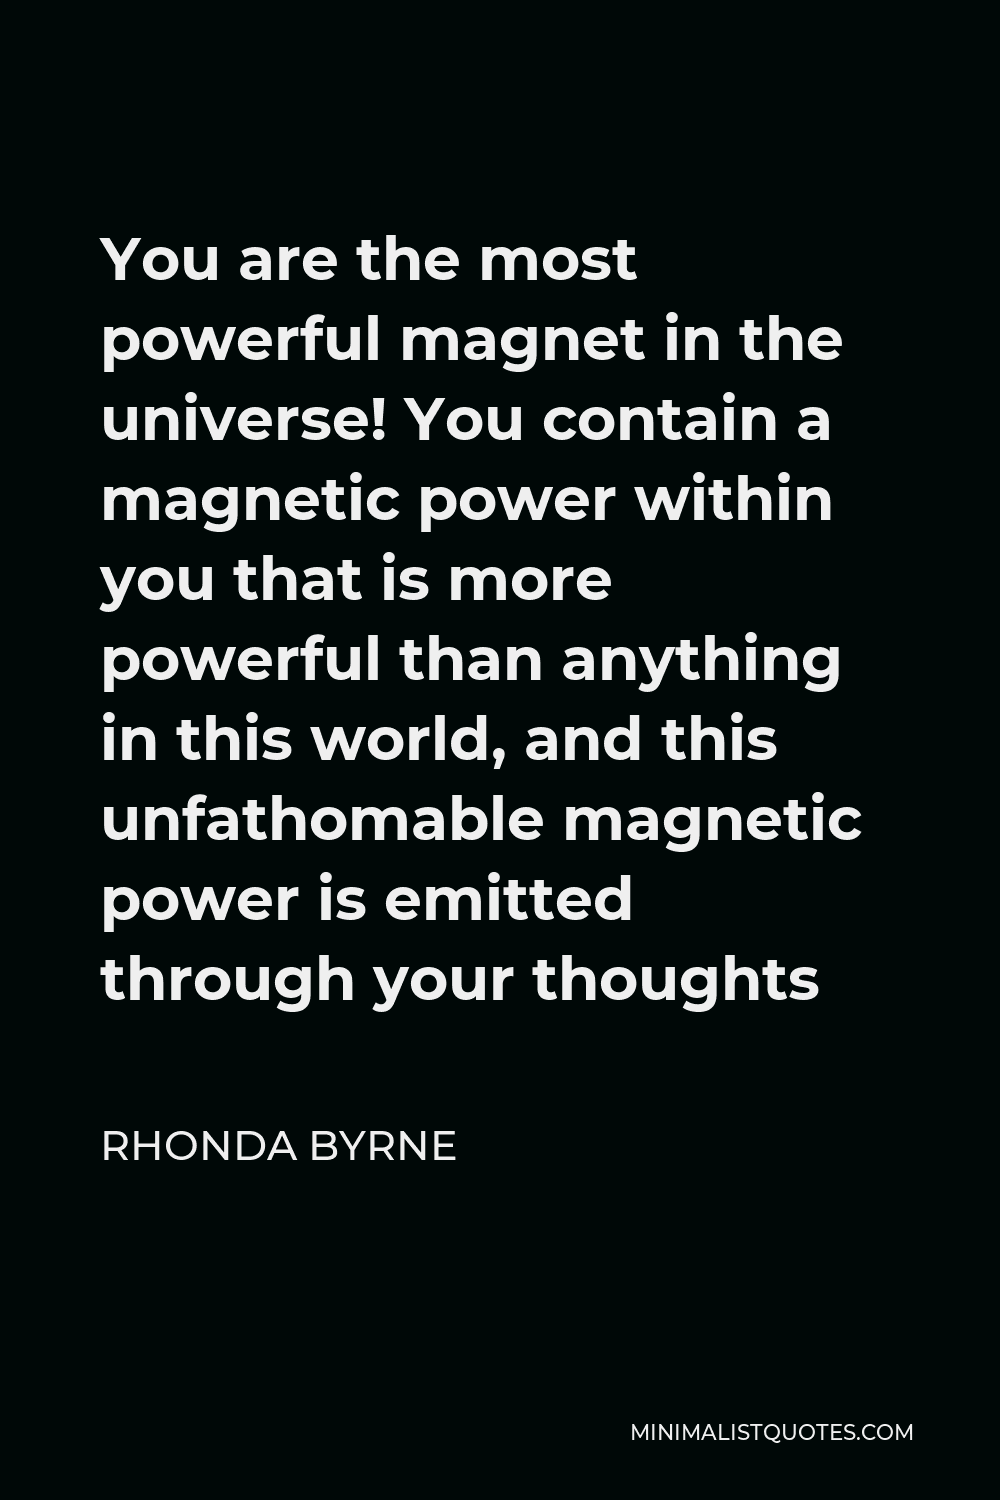 Rhonda Byrne Quote - You are the most powerful magnet in the universe! You contain a magnetic power within you that is more powerful than anything in this world, and this unfathomable magnetic power is emitted through your thoughts